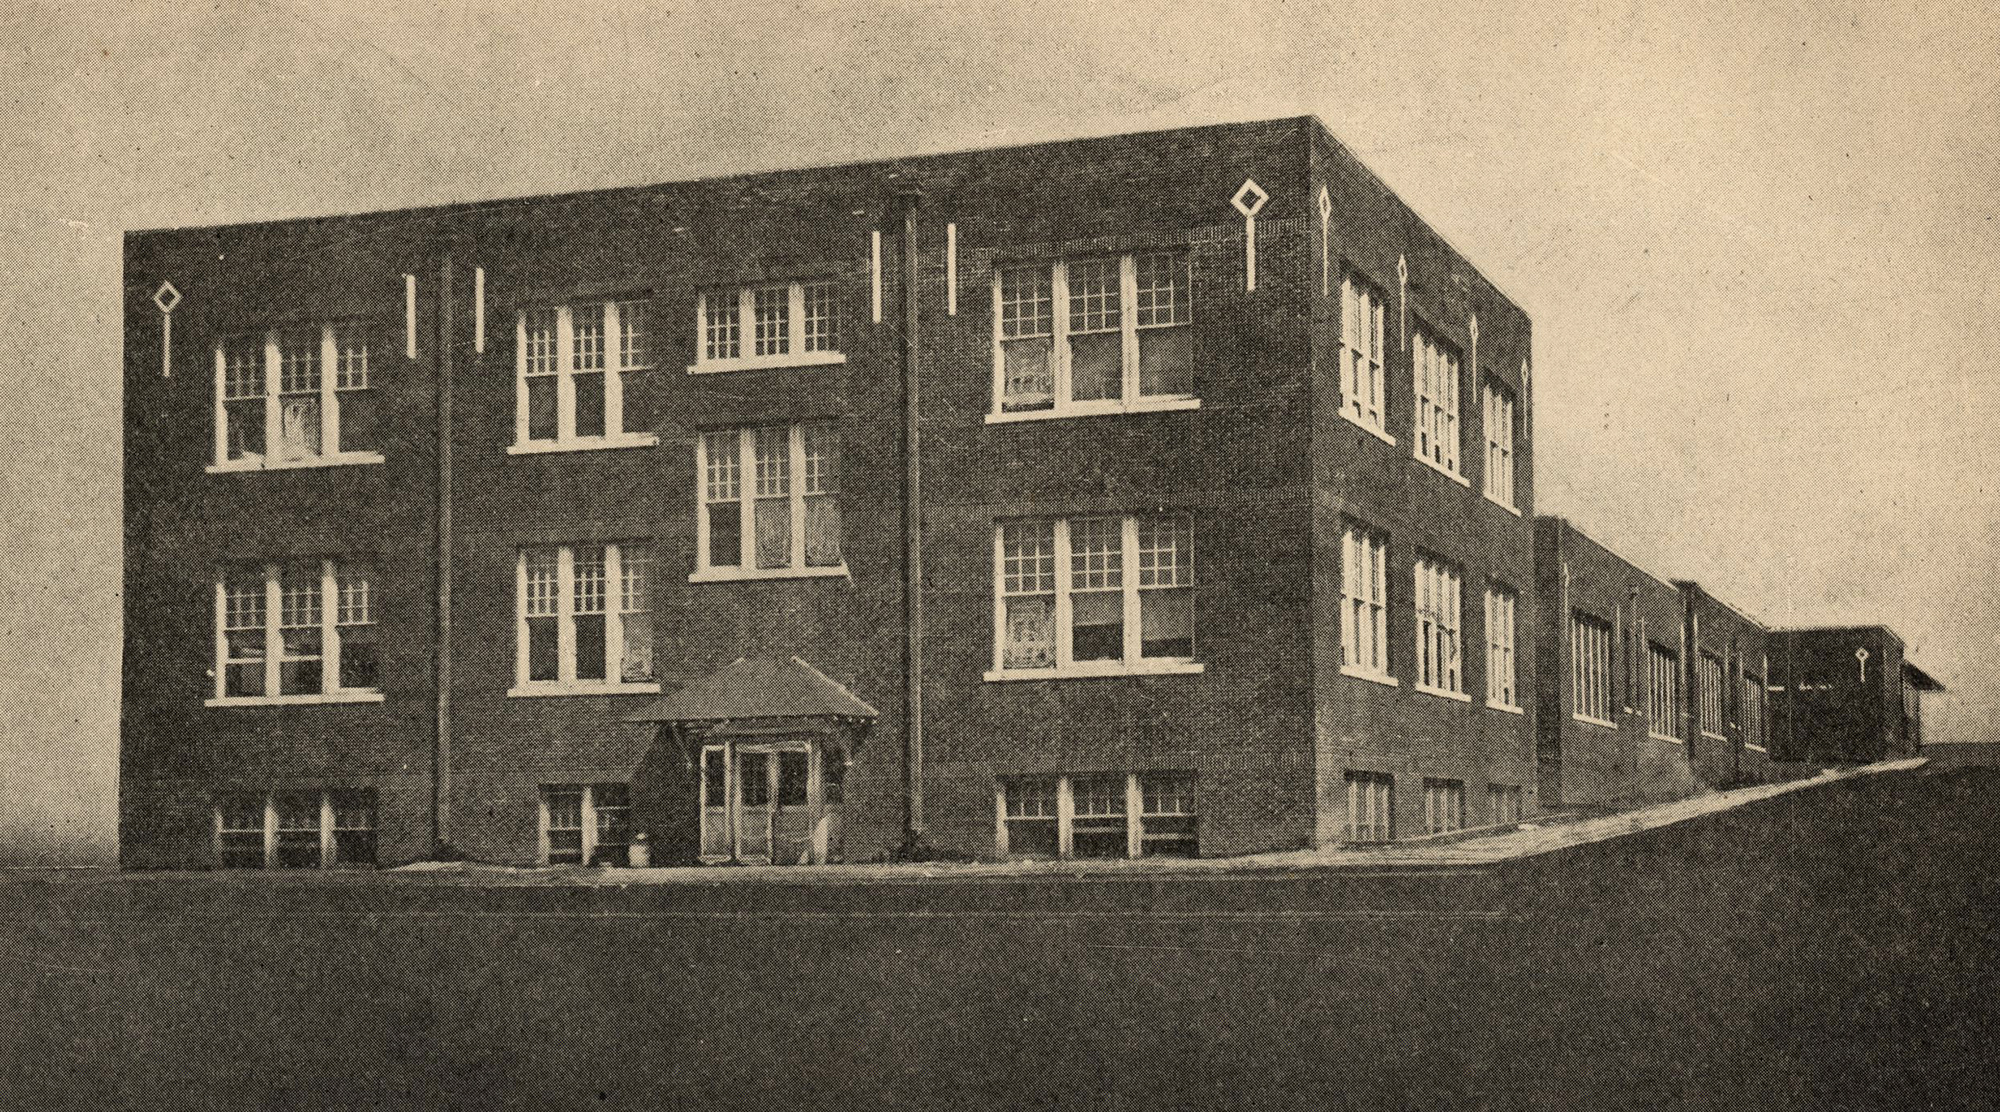 Picture of the Booker T. Washington High School in the Greenwood District, 1920.